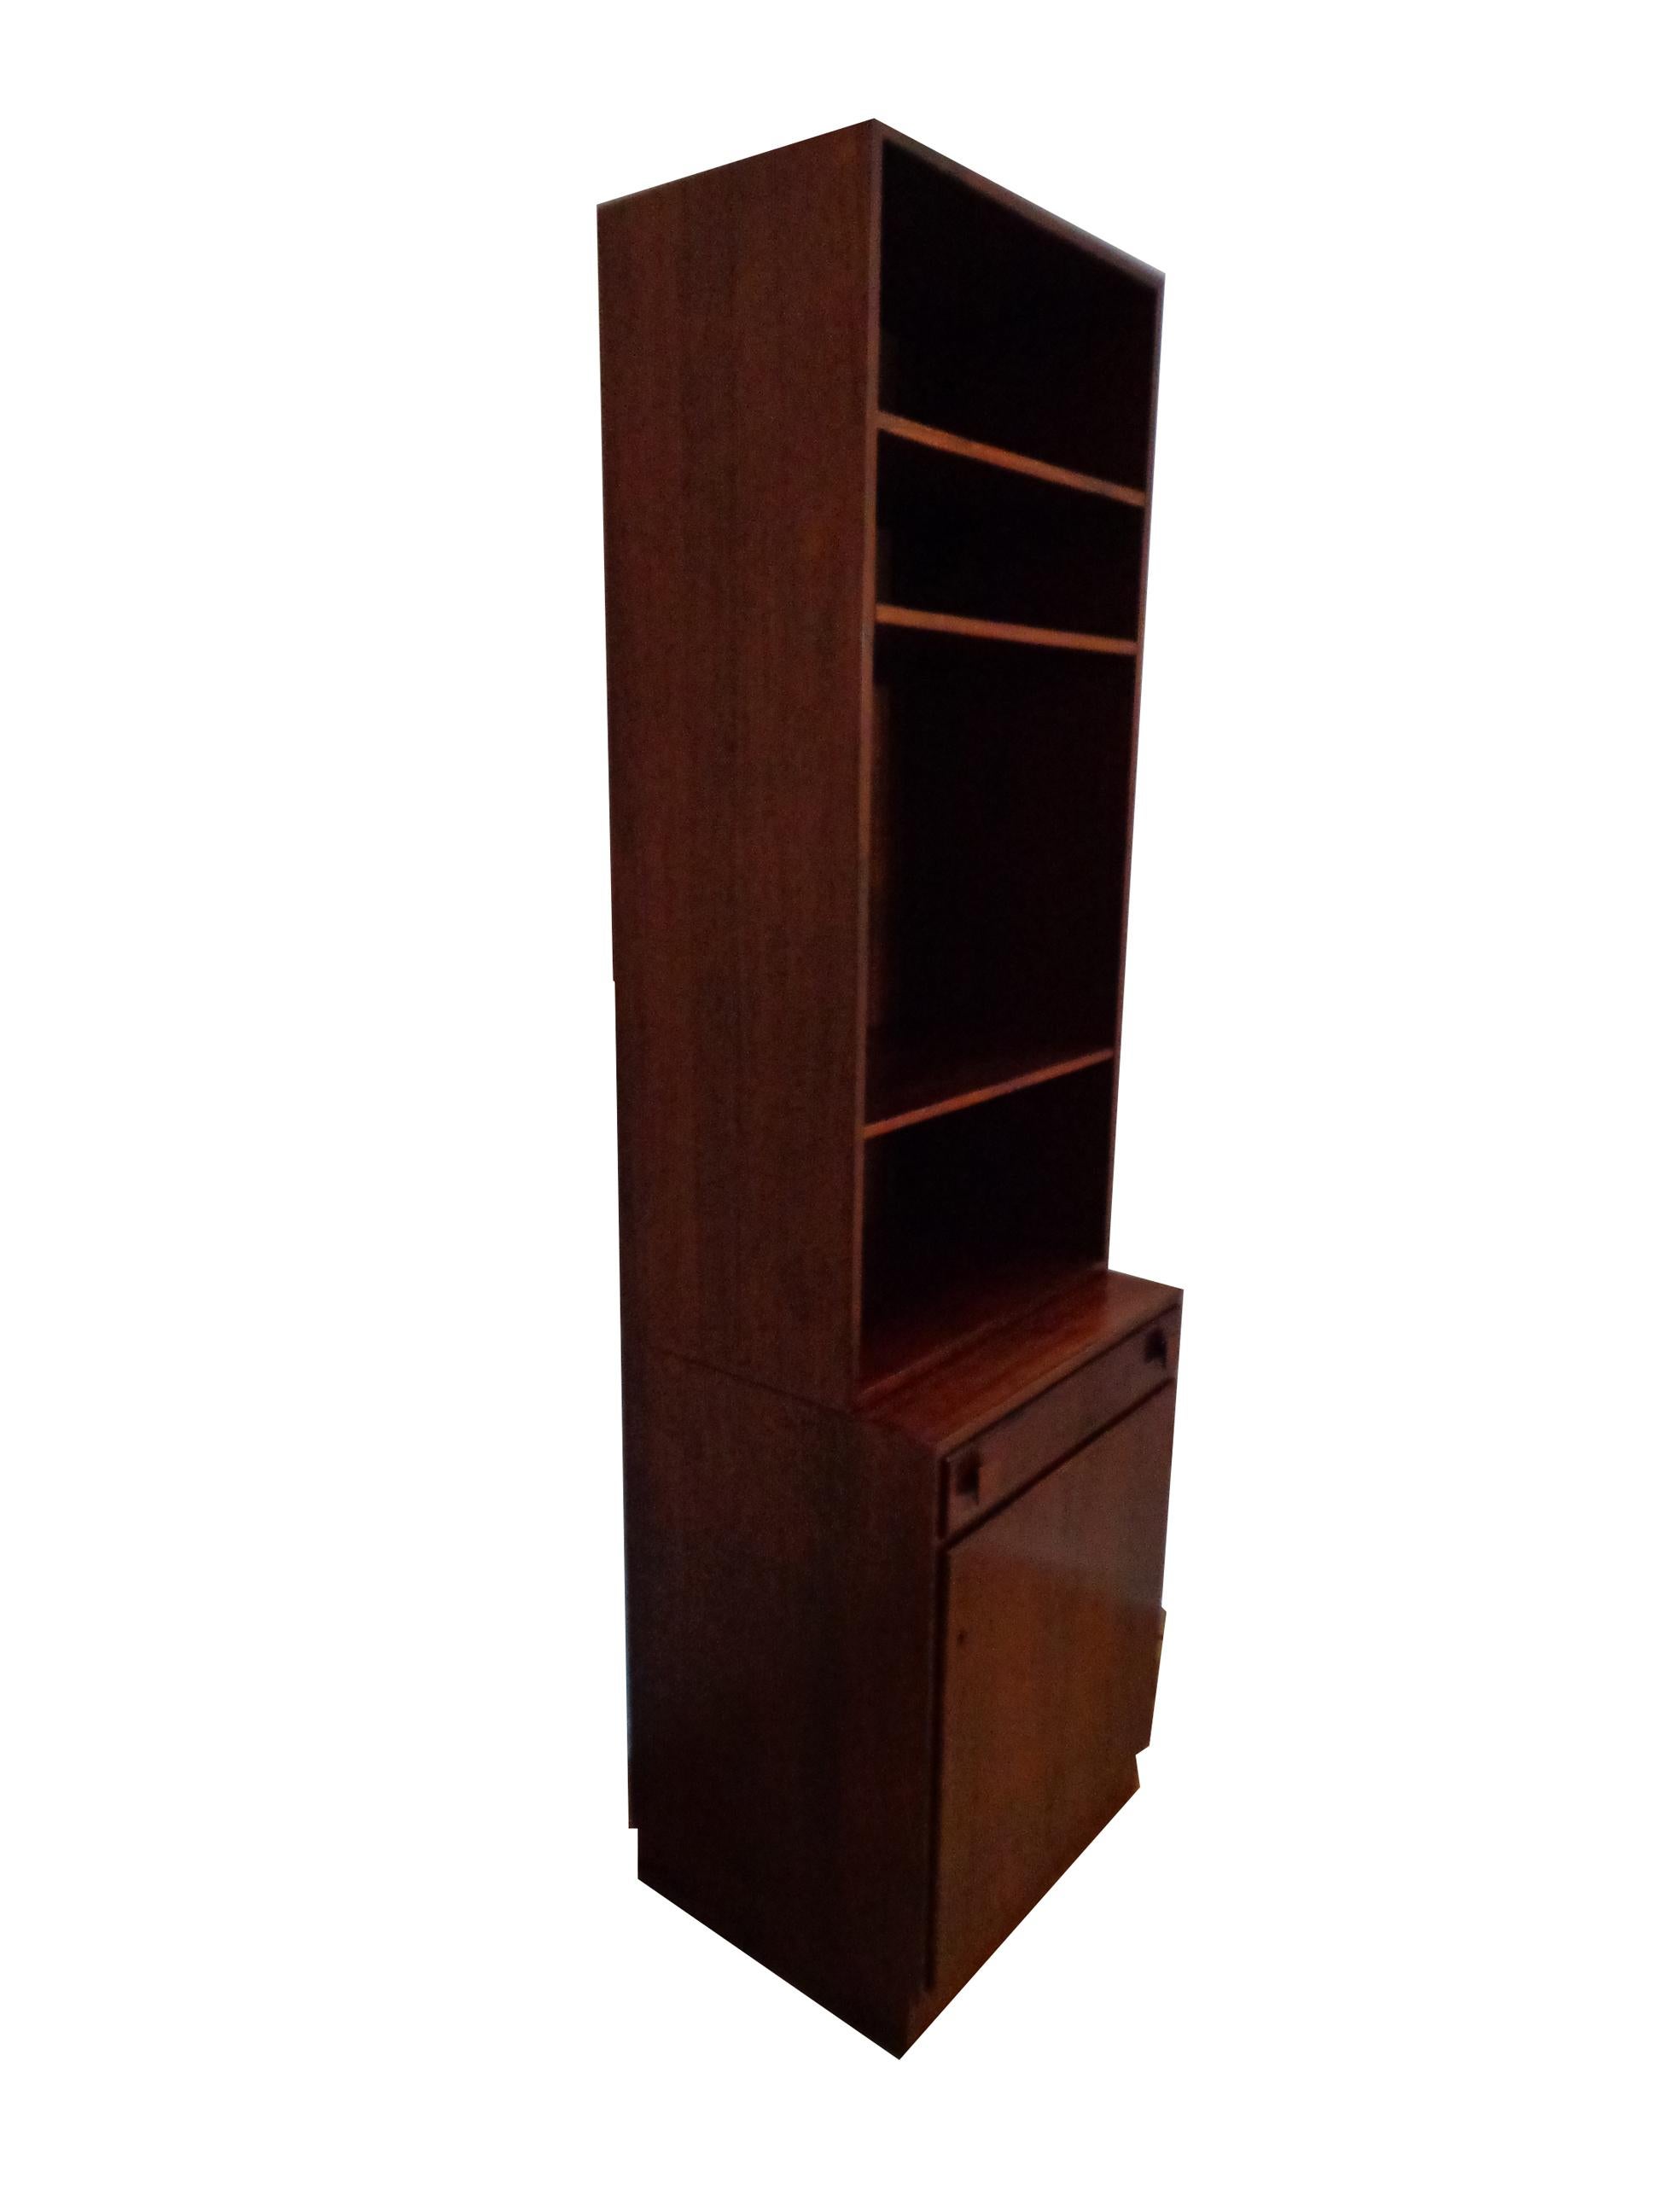 Offerd by Zitzo, Amsterdam: Wall cabinet of rosewood designed by Takashi Okamura and Erik Marquardsen, consisting base cabinet with door and shelves inside. Original key included.
Manufactured by O. Bank Larsen Møbelfabrik. Signed with paper makers